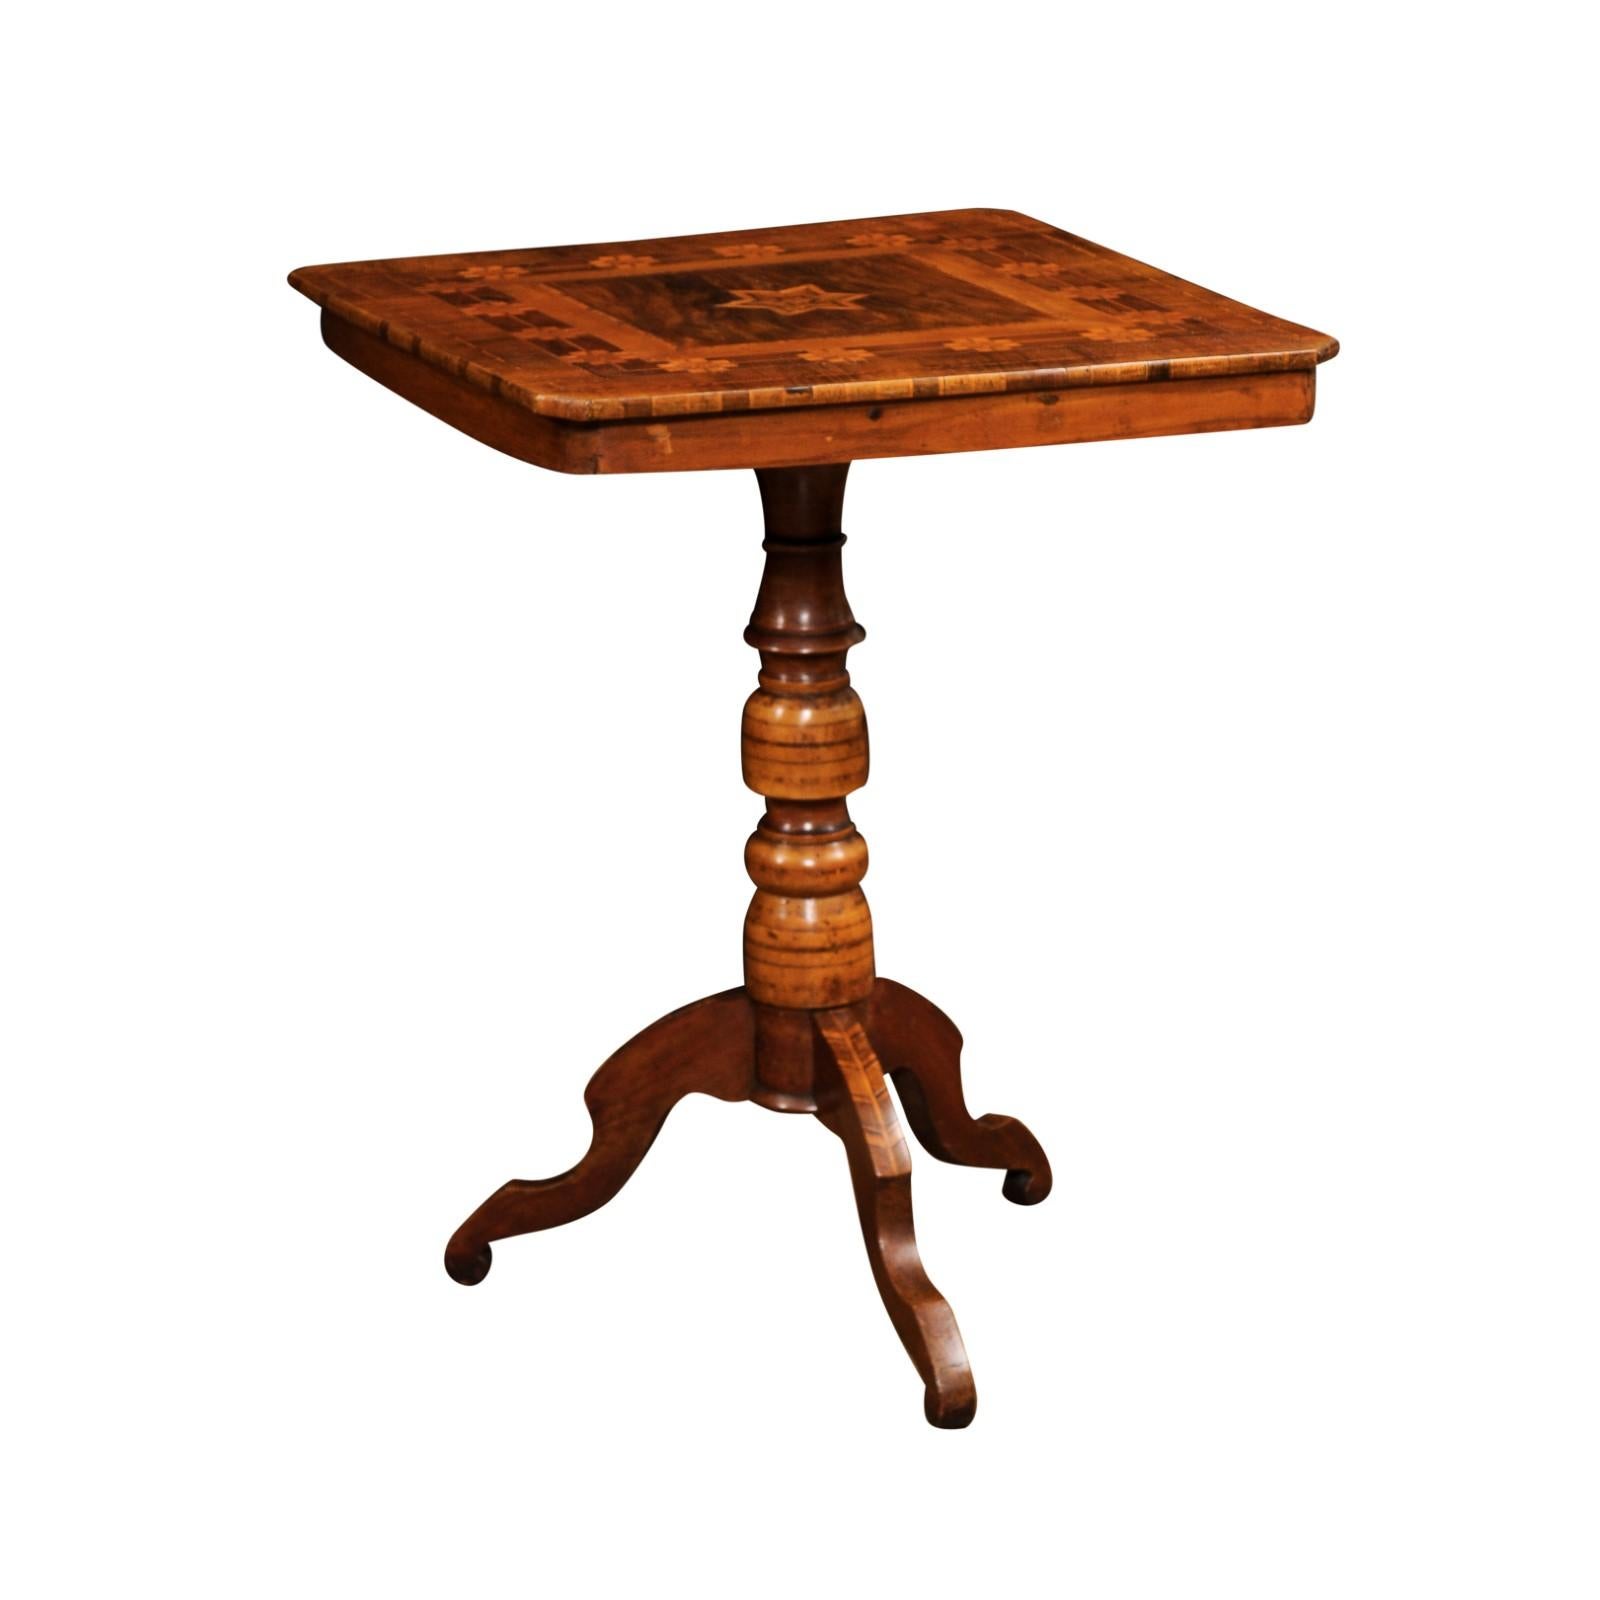 An Italian walnut, mahogany and European birch center table from the 19th century, with geometric and star shaped marquetry decor and turned pedestal. Created in Italy during the 19th century, this inlaid center pedestal table features a nearly